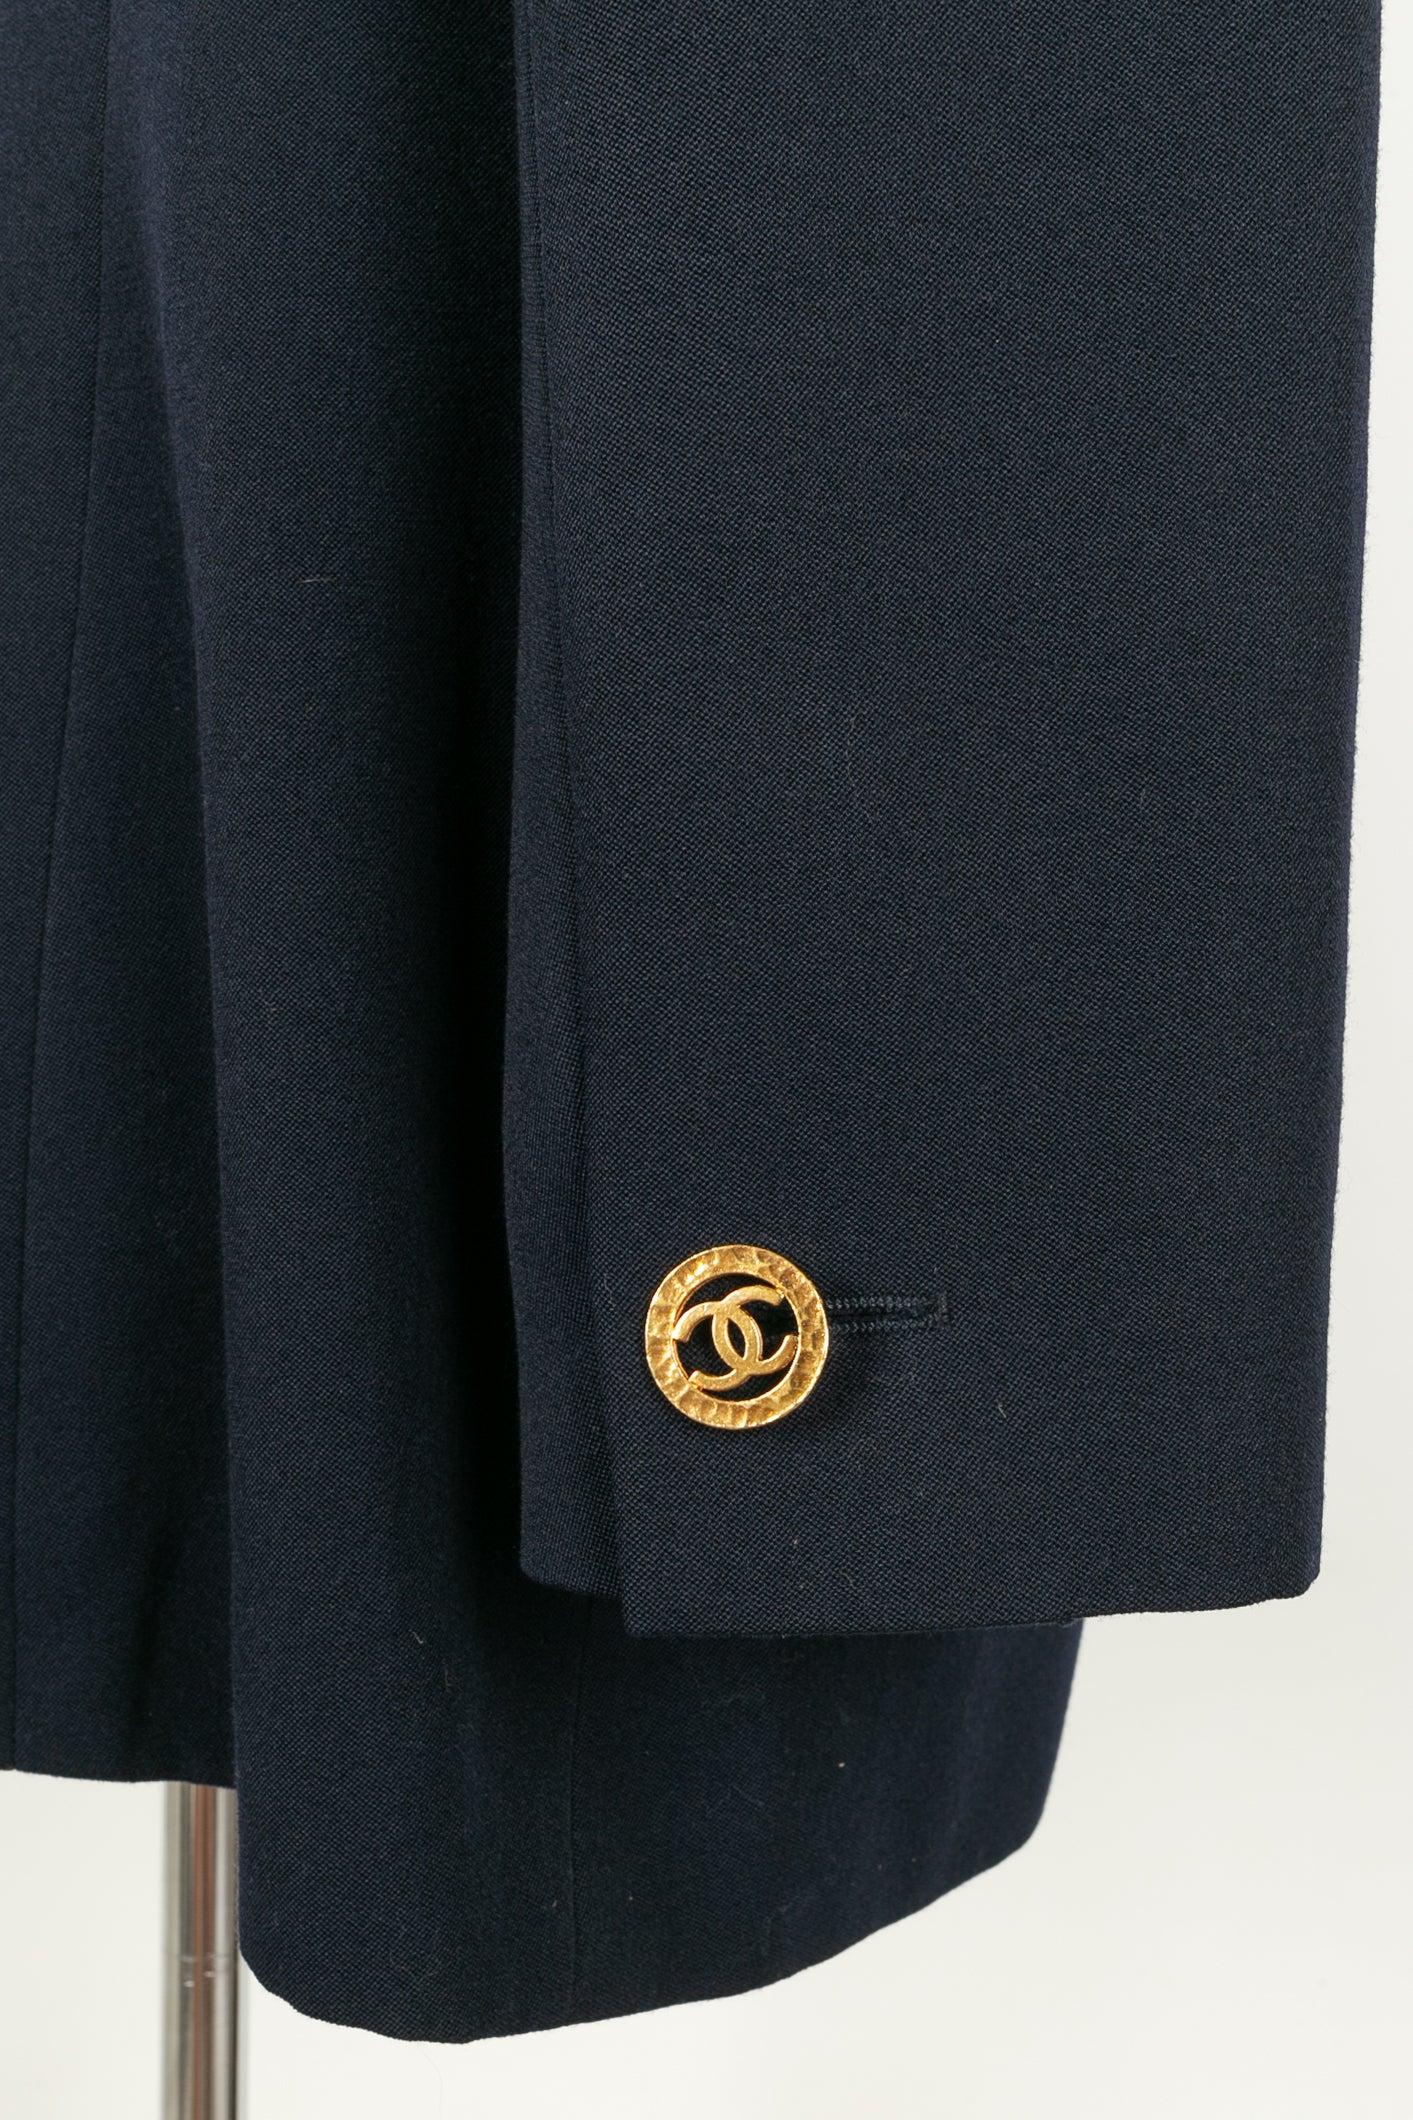 Chanel Navy Blue Wool Jacket with a Silk Lining, 1990s For Sale 2